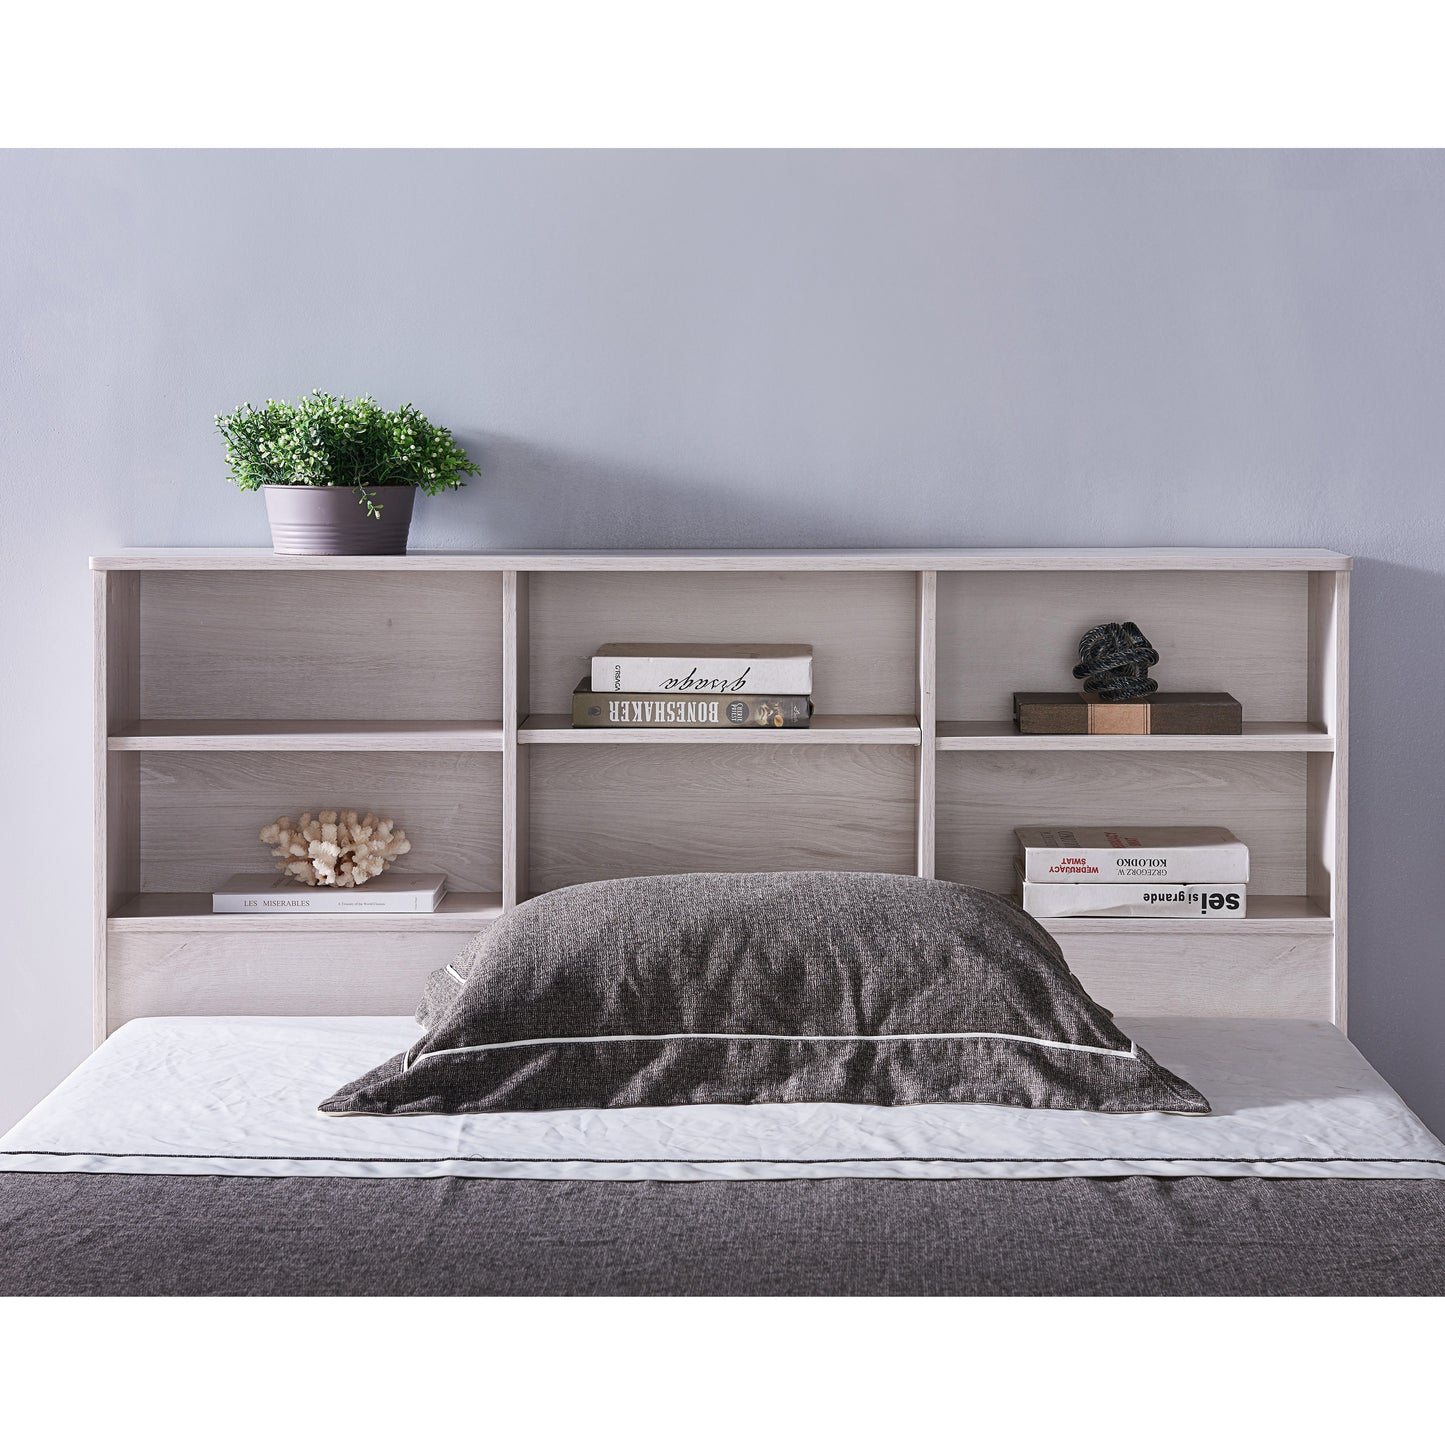 Front-facing optional headboard detail view of a contemporary three-drawer storage bed in a bedroom with accessories